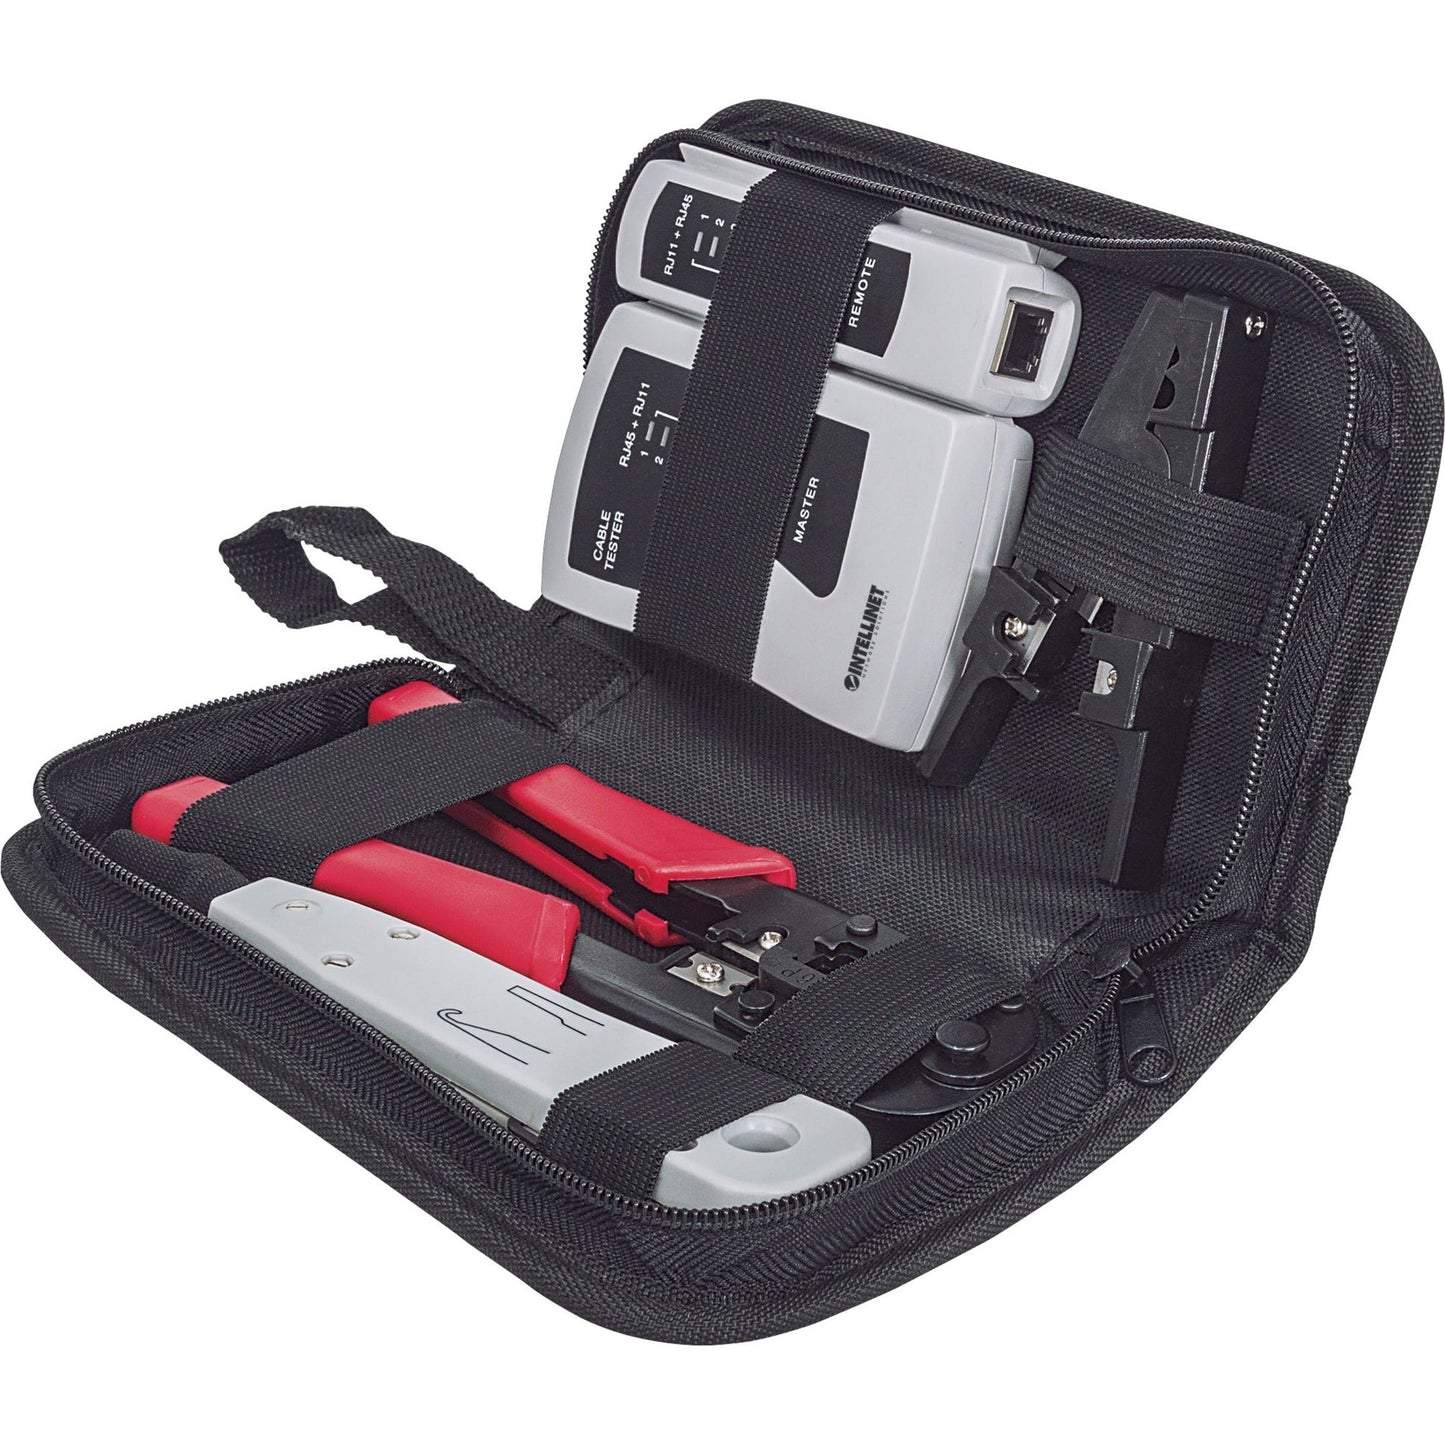 Intellinet Network Solutions 4-Piece Network Tool Kit Composed of LAN Tester LSA Punch Down Tool Crimping Tool and Cutter/Stripper Tool